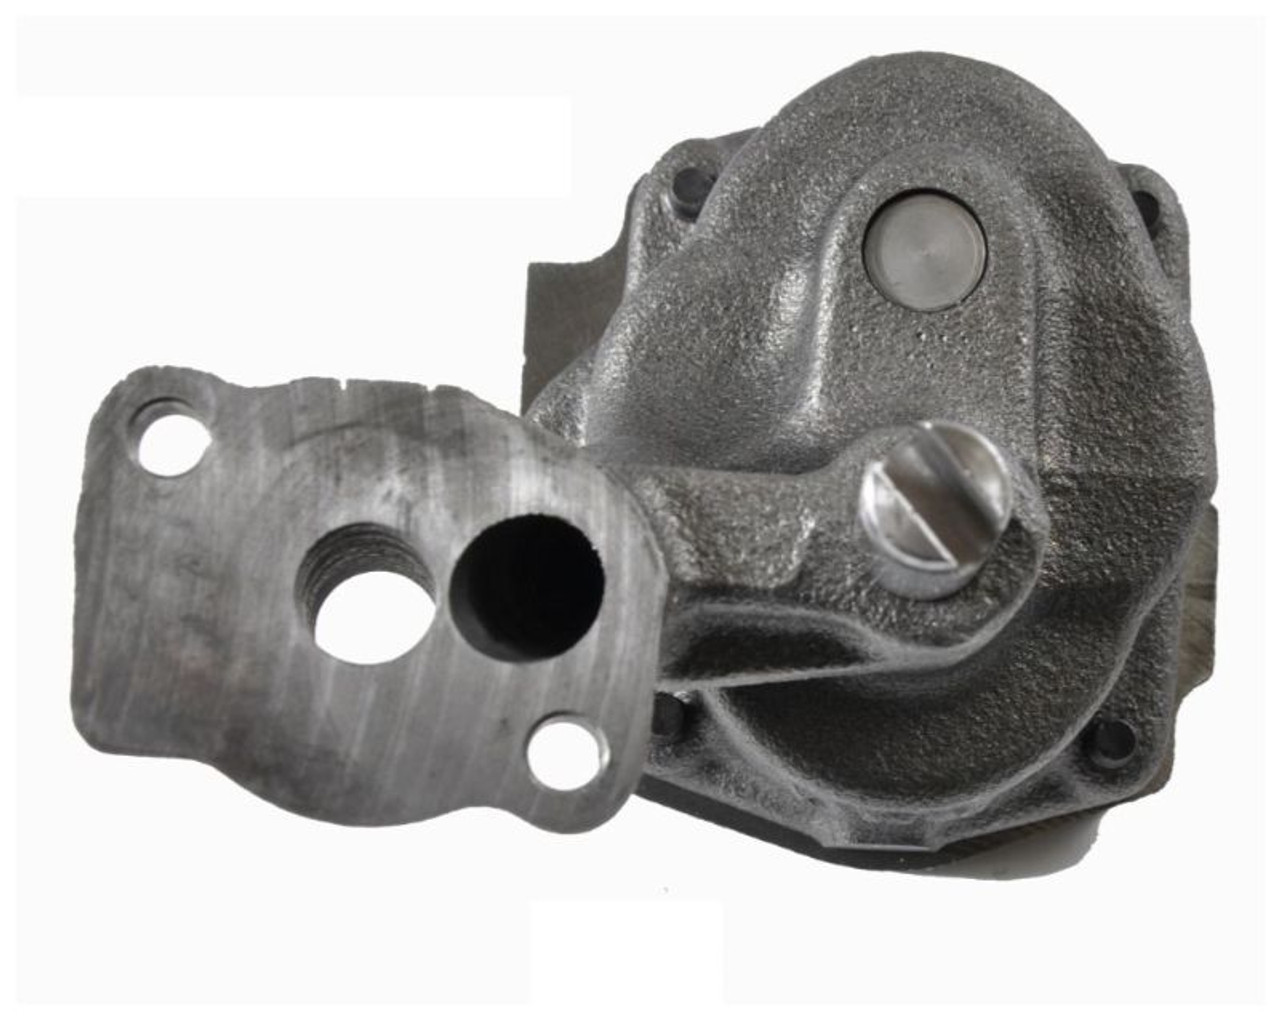 1994 Buick Commercial Chassis 5.7L Engine Oil Pump EP55 -3038